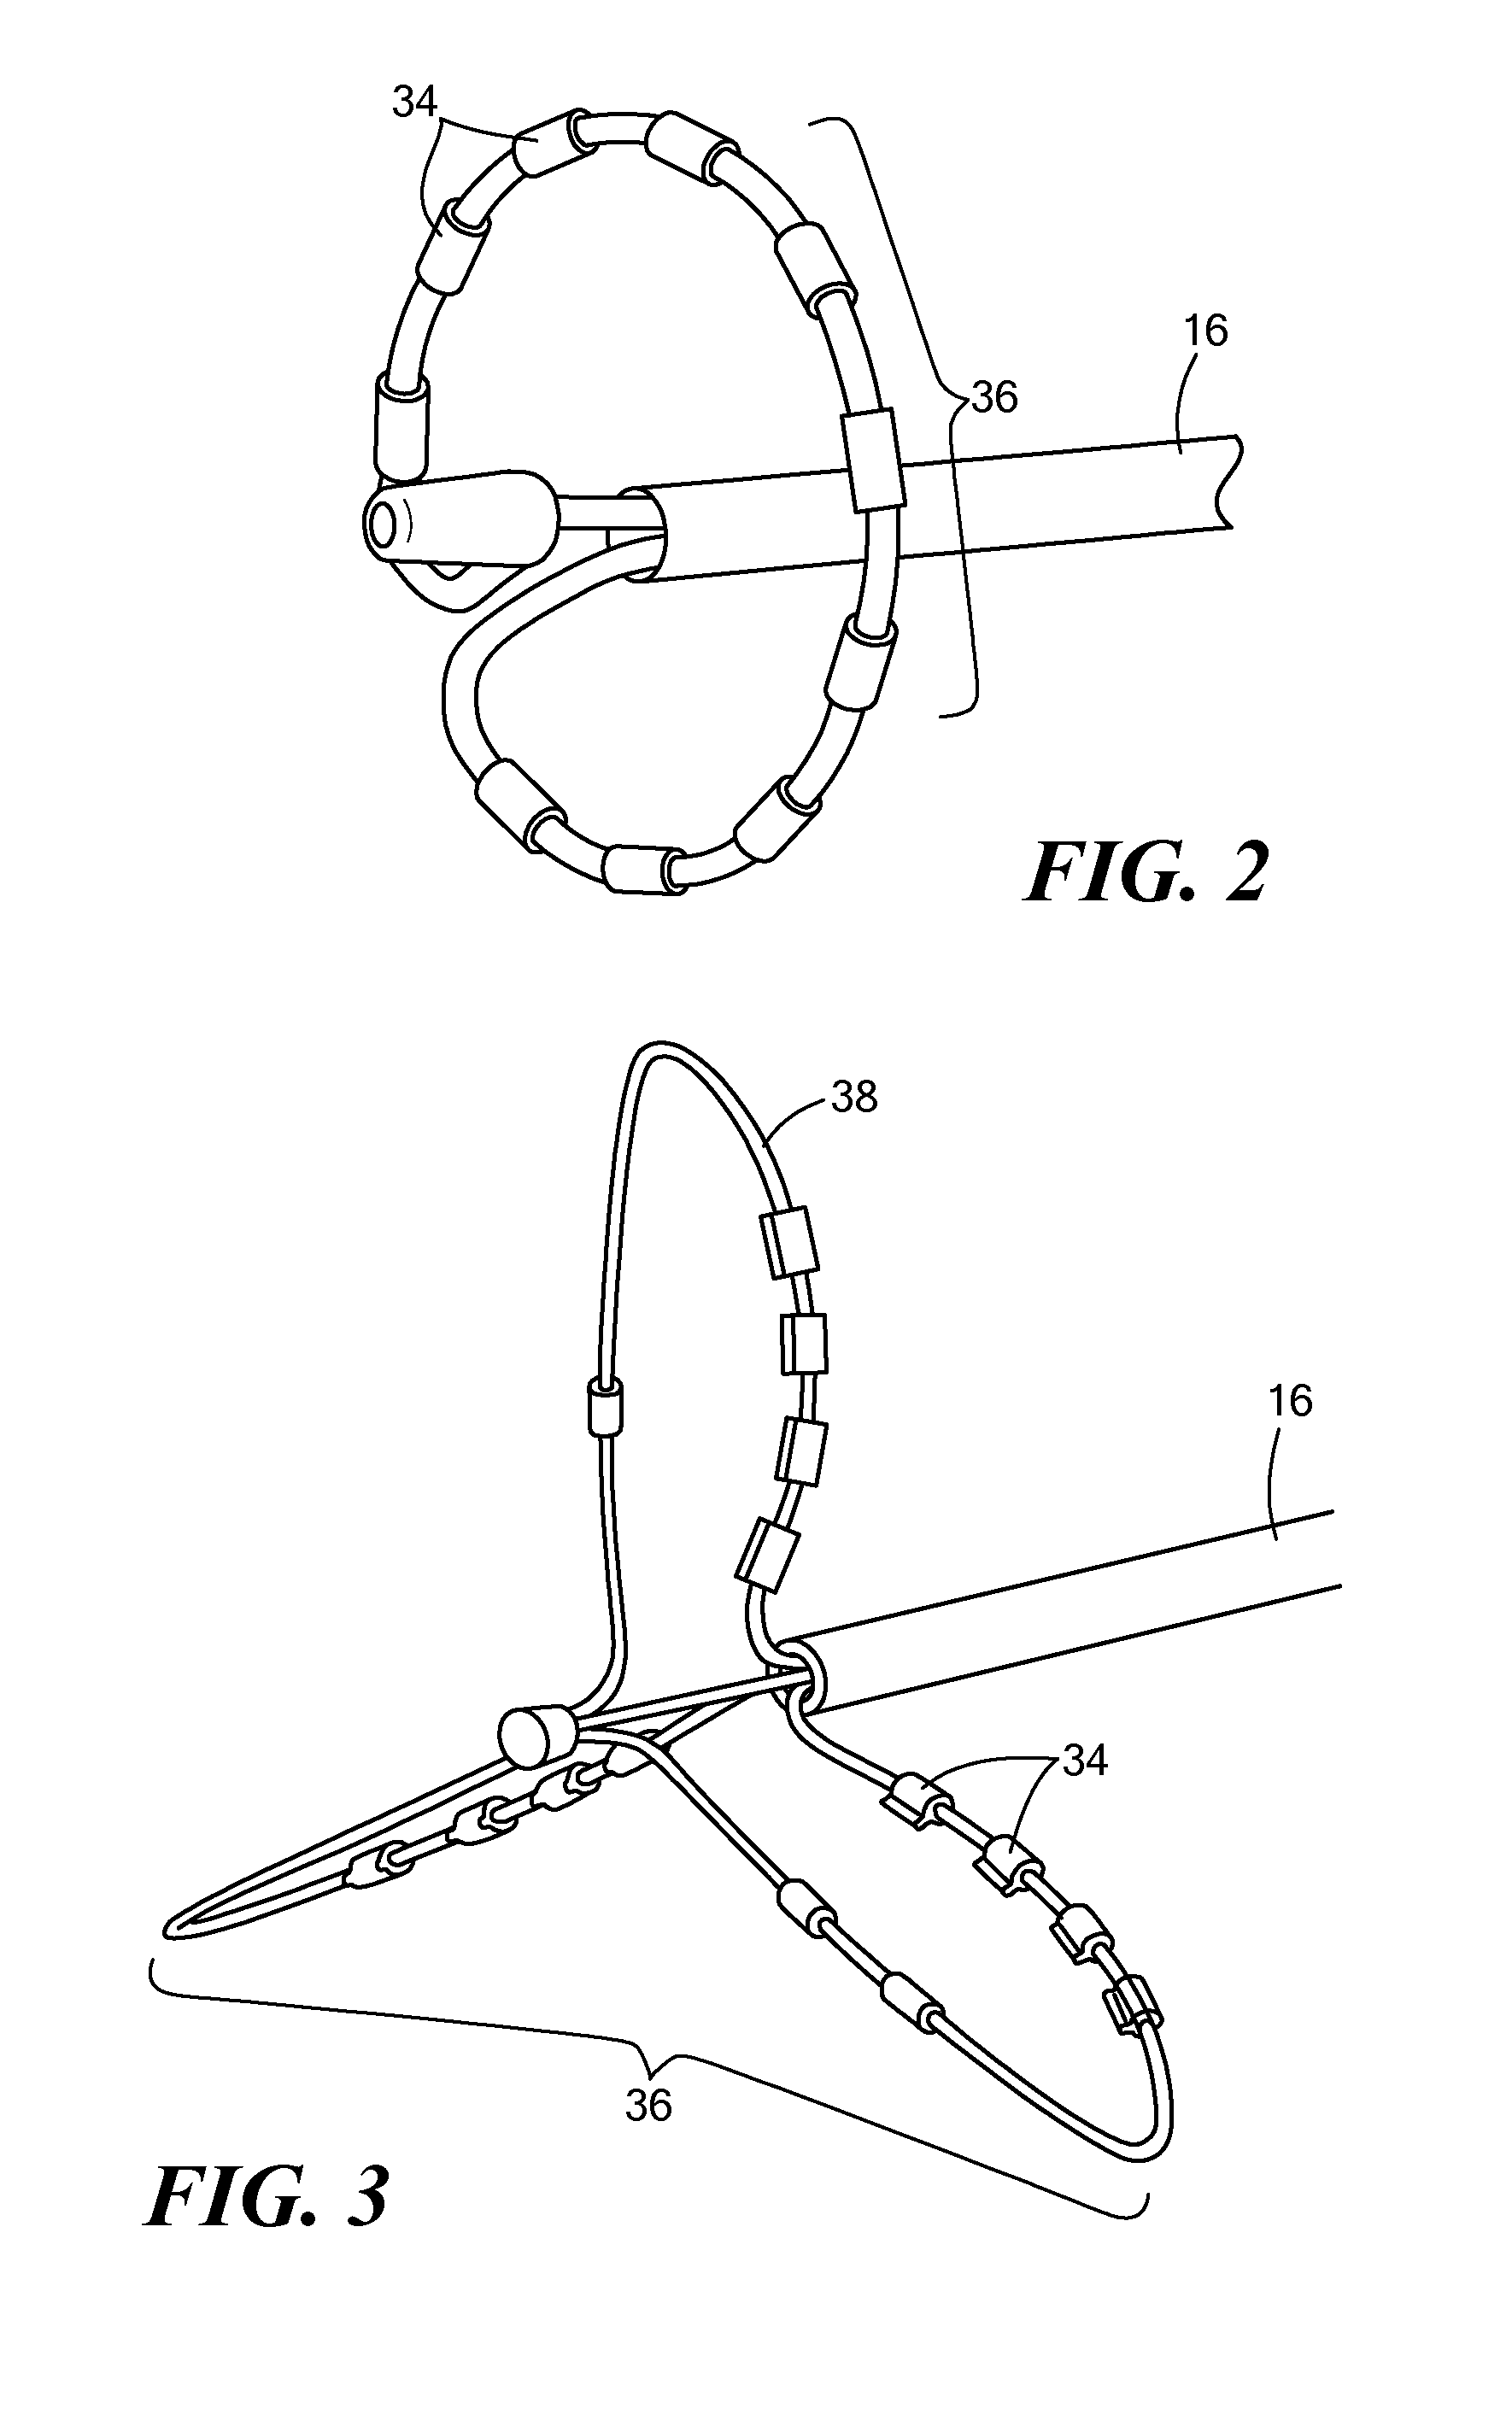 Systems and methods for detecting tissue contact during ablation